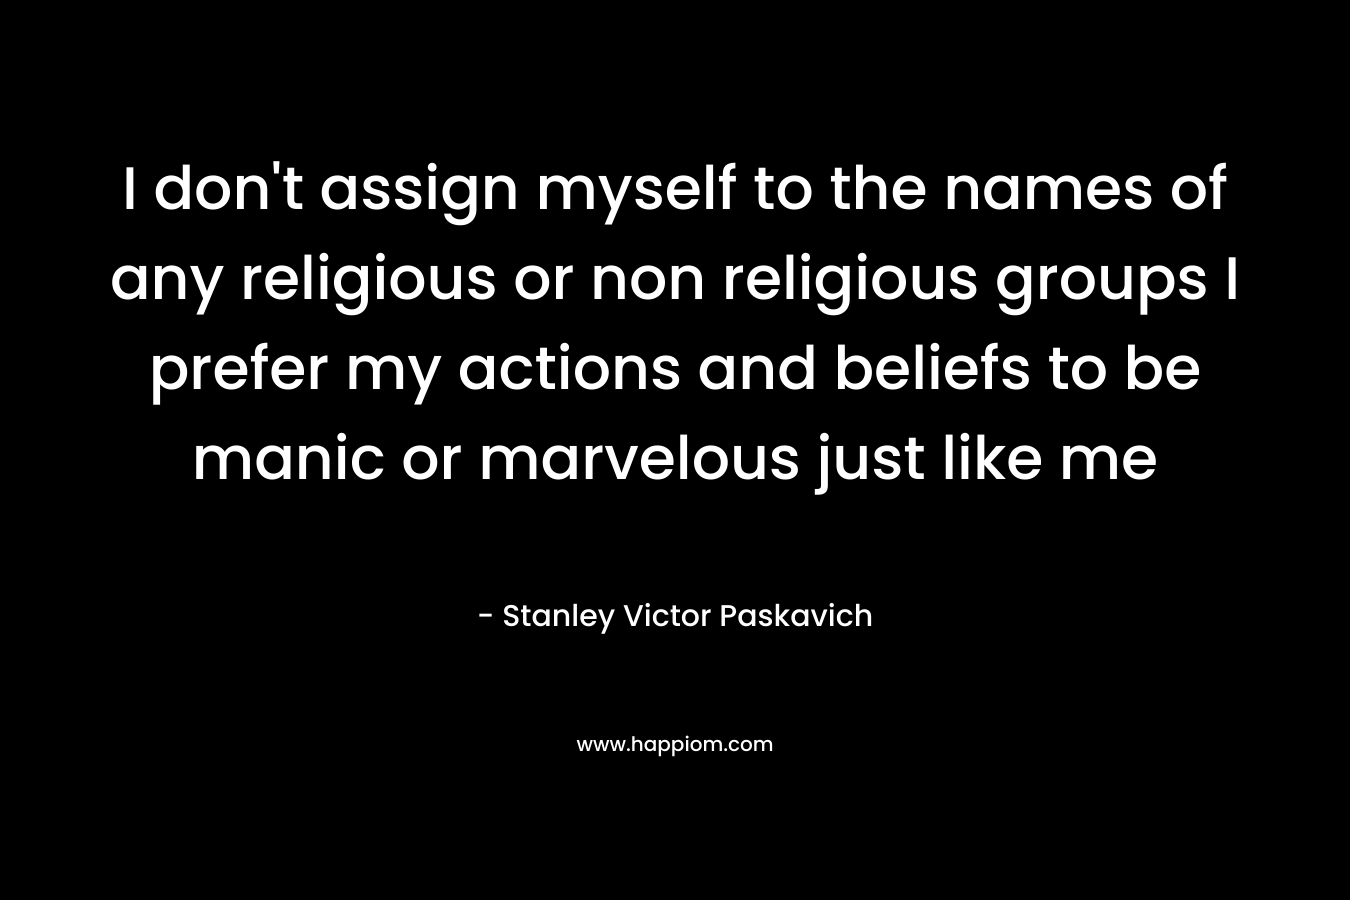  I don't assign myself to the names of any religious or non religious groups I prefer my actions and beliefs to be manic or marvelous just like me